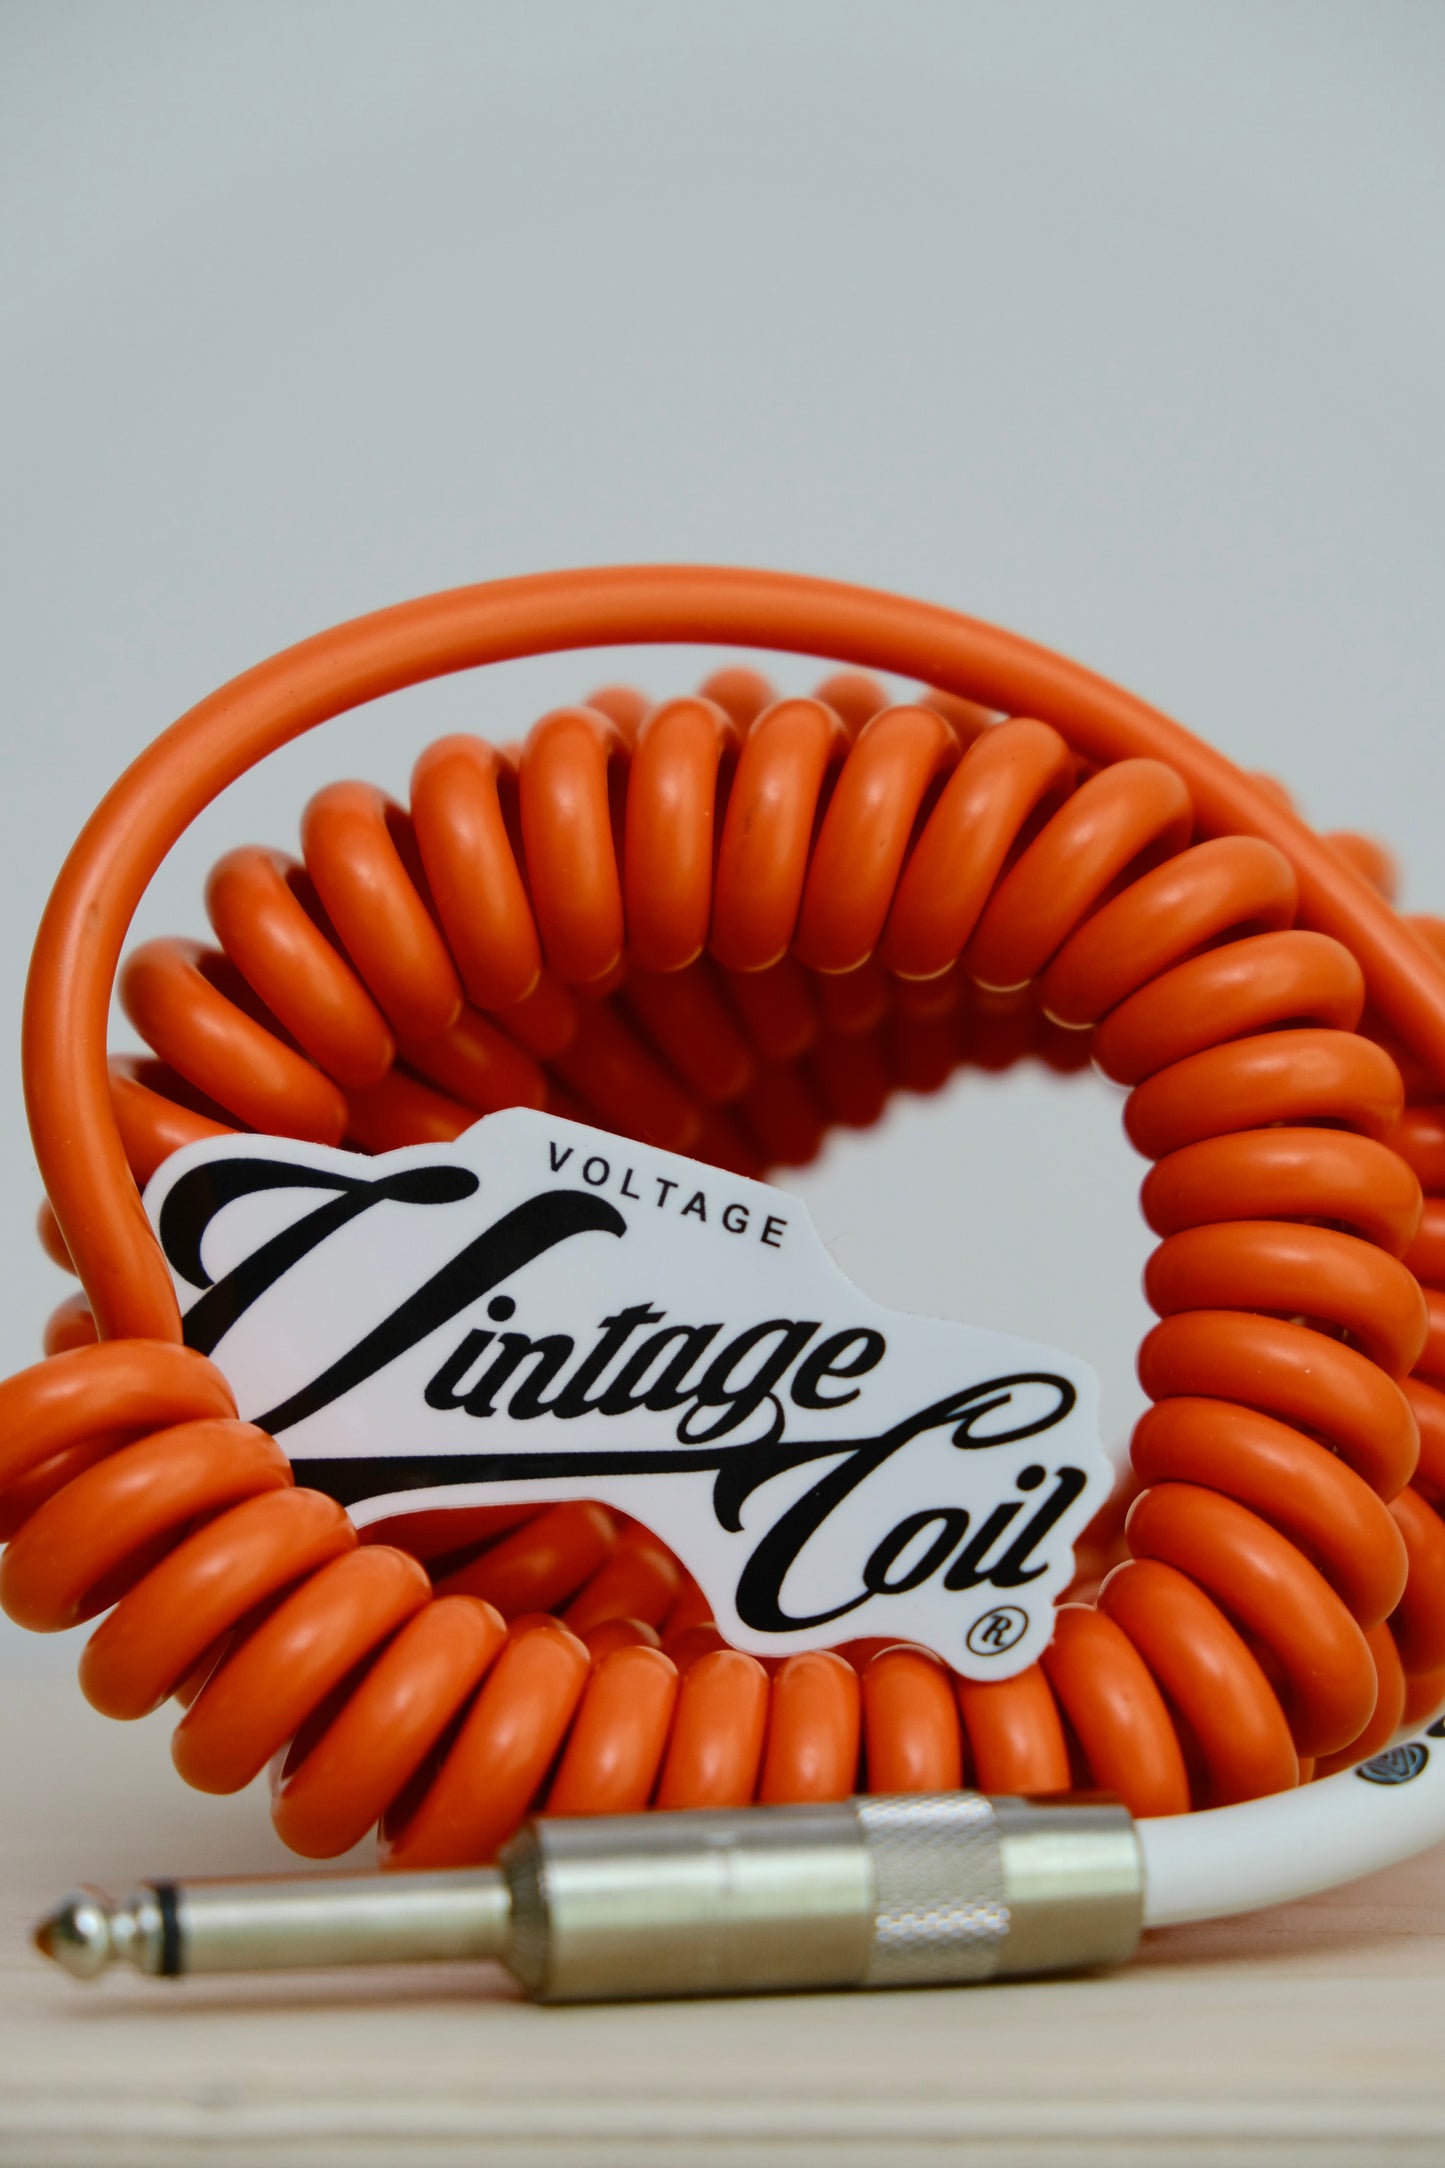 Voltage Cable Co. Vintage Coil Instrument Cable 25' - Orange Straight to Straight Plugs